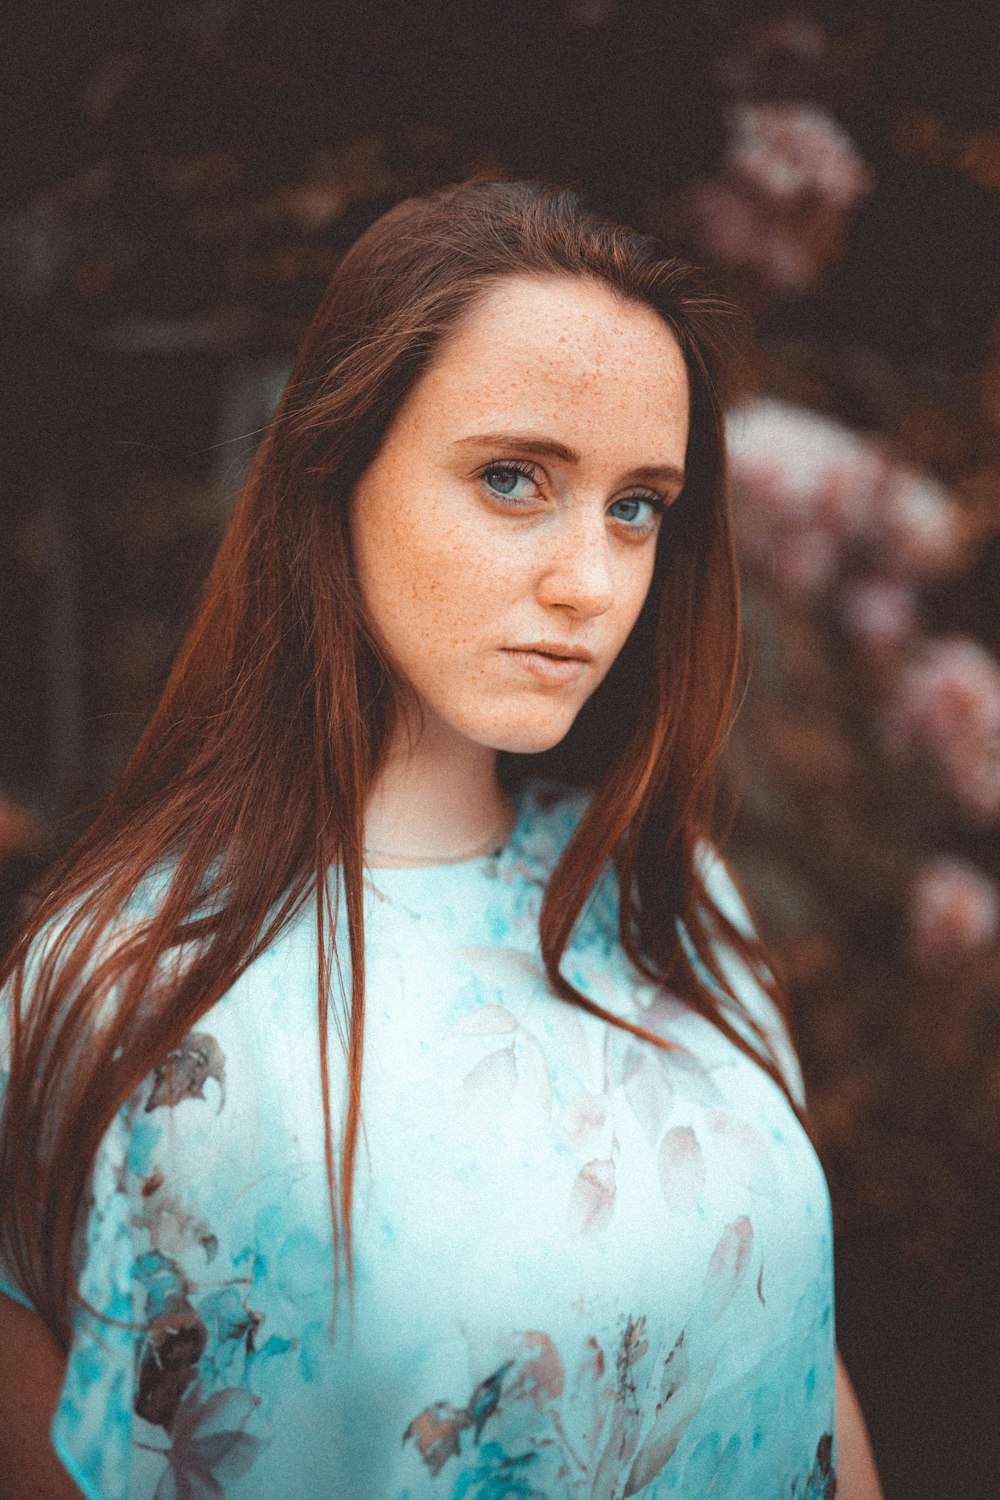 woman in white and blue floral shirt